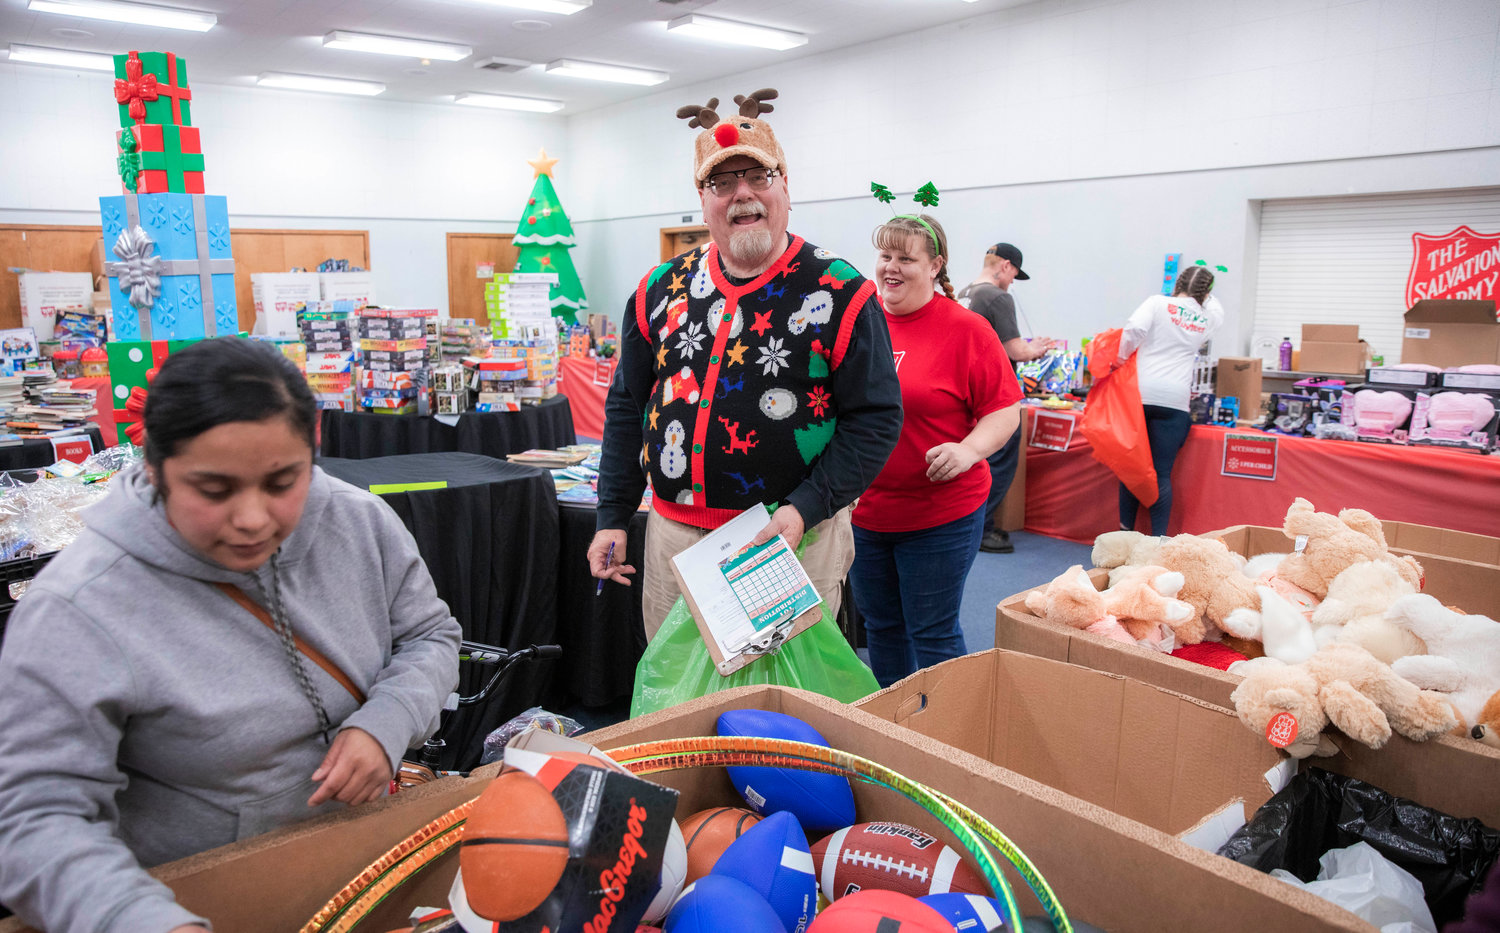 Lewis County Emergency Management Deputy Director Ross McDowell helps visitors at The Salvation Army toy giveaway Tuesday evening in Centralia.